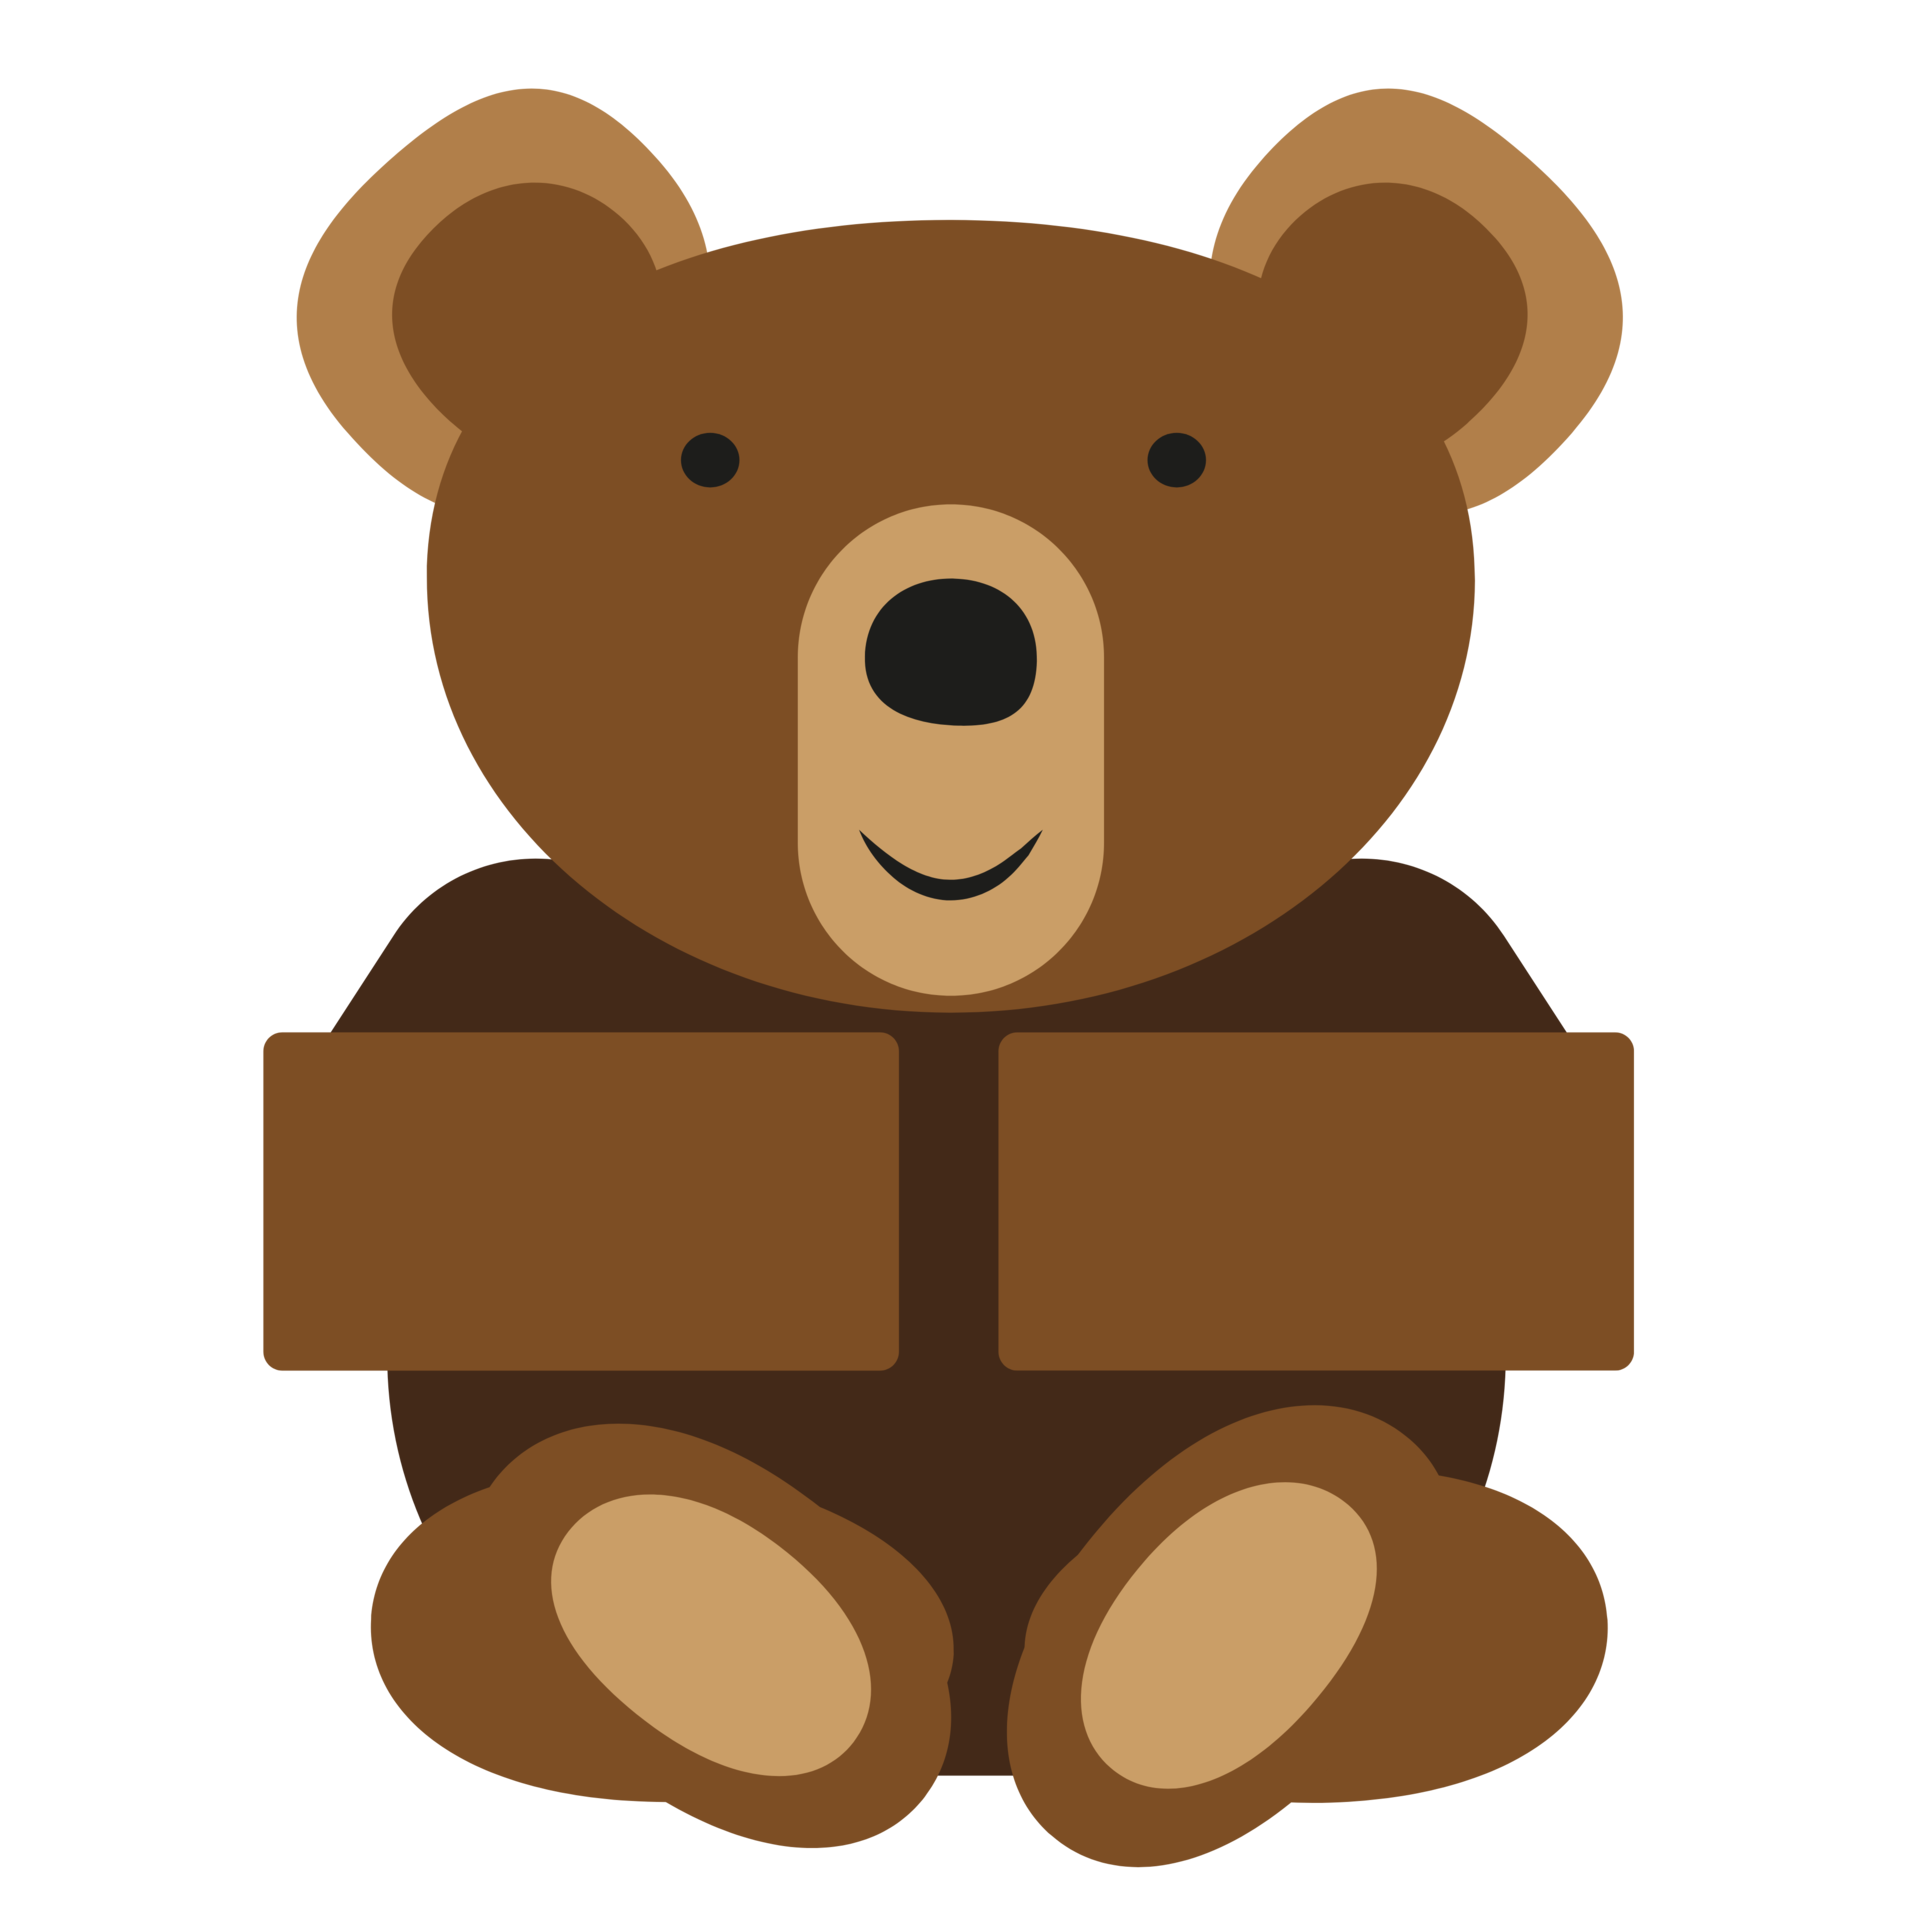 Cute Teddy Bear PNG Free Images with Transparent Background - (1,279 Free  Downloads)